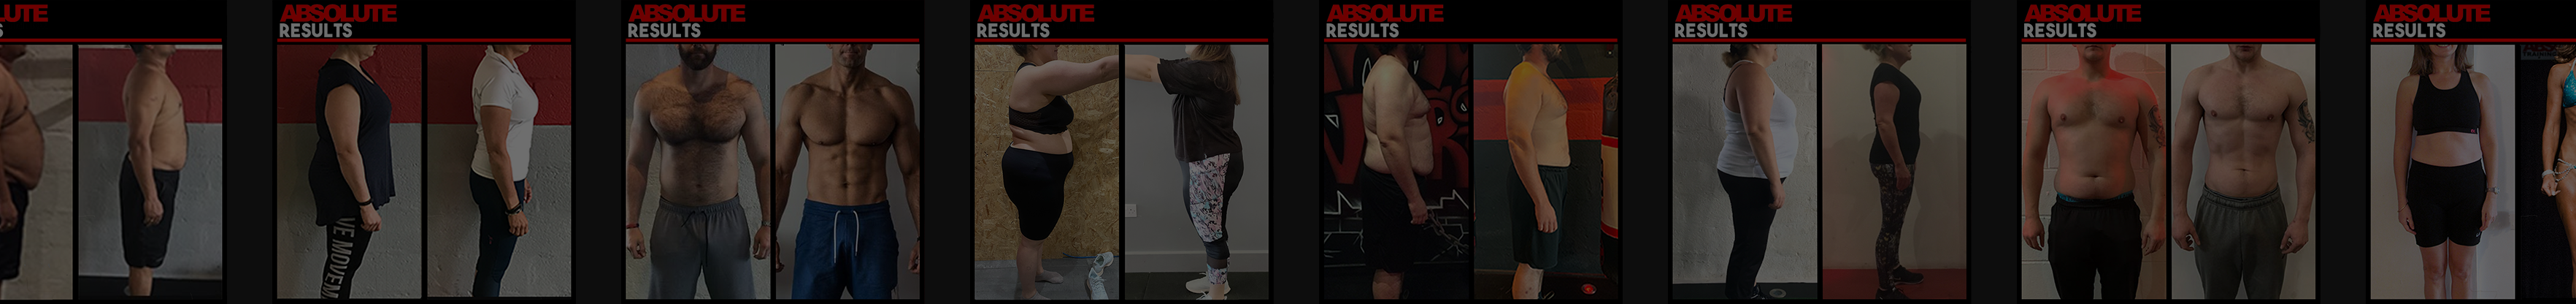 a banner image showing body transformations of some of our clients